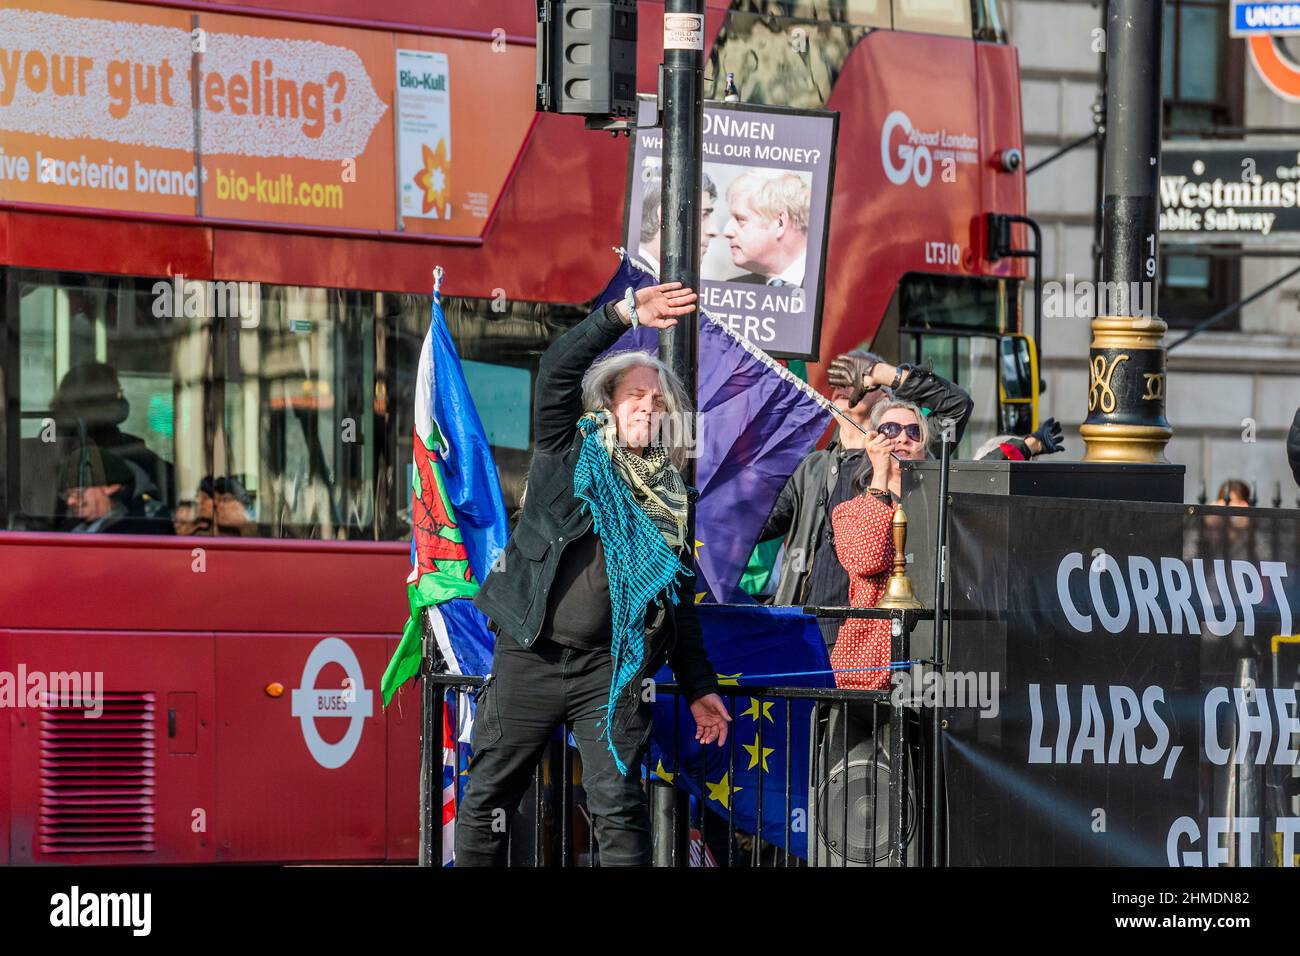 London, UK. 9th Feb, 2022. Gut feeling - SODEM (Pro EU) protest, led by Steve Bray, now accuse the Prime minister and his party of being 'corrupt' and 'liars' - Protesters in Westminster on the day of PMQ's. Boris Johnsons returns to Prime Minister's Questions (PMQ's) as his troubled times continue. Credit: Guy Bell/Alamy Live News Stock Photo